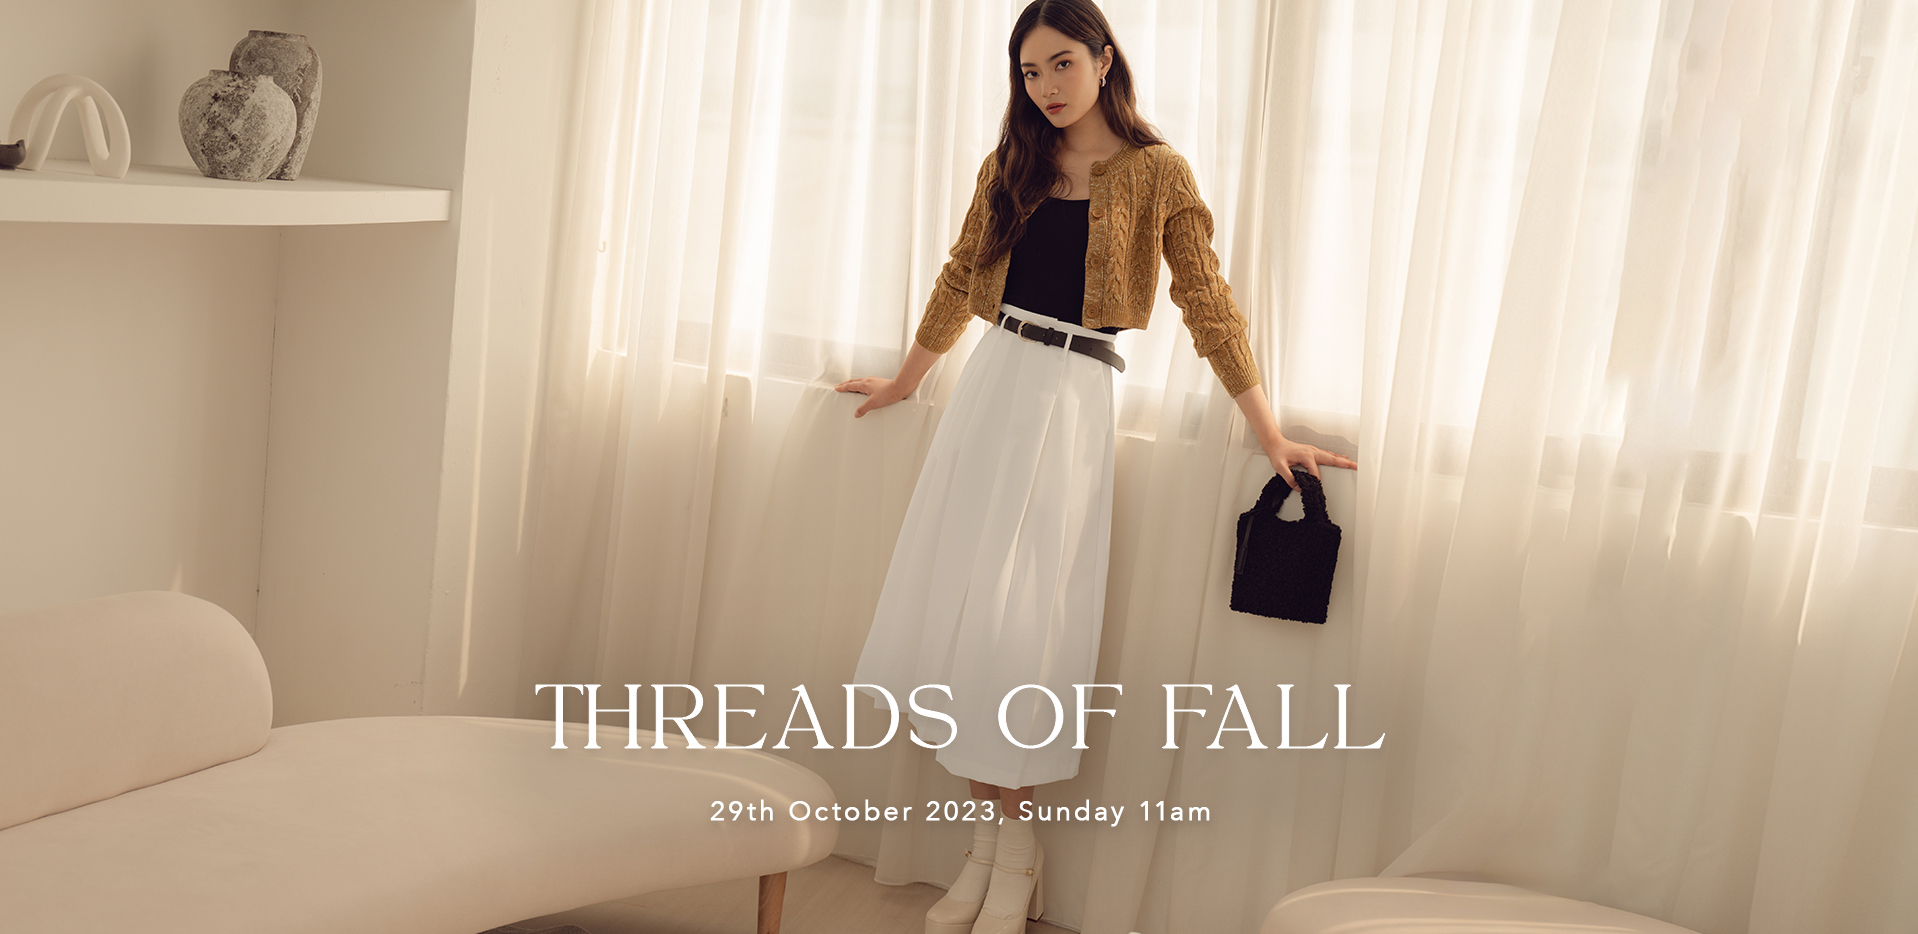 THREADS OF FALL